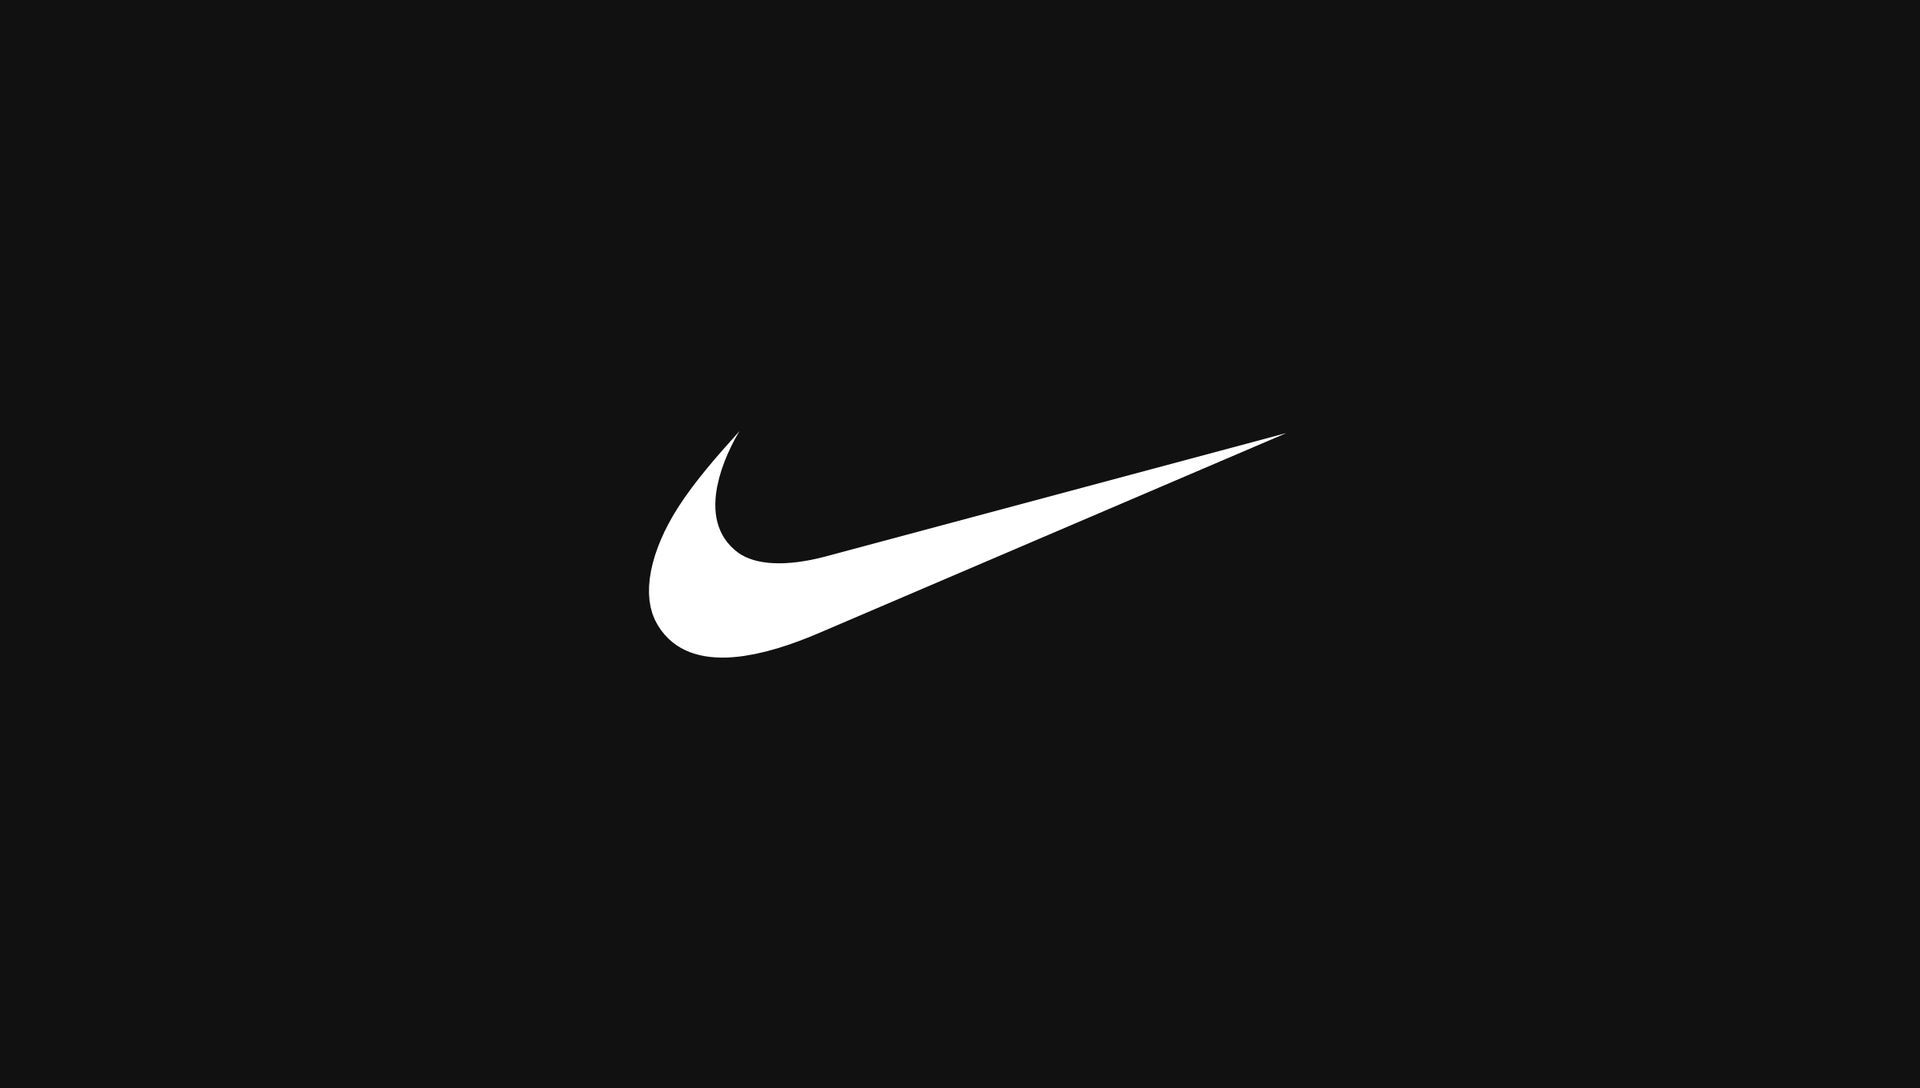 Women's Shoes, Clothing & Accessories. Nike.com بري نان